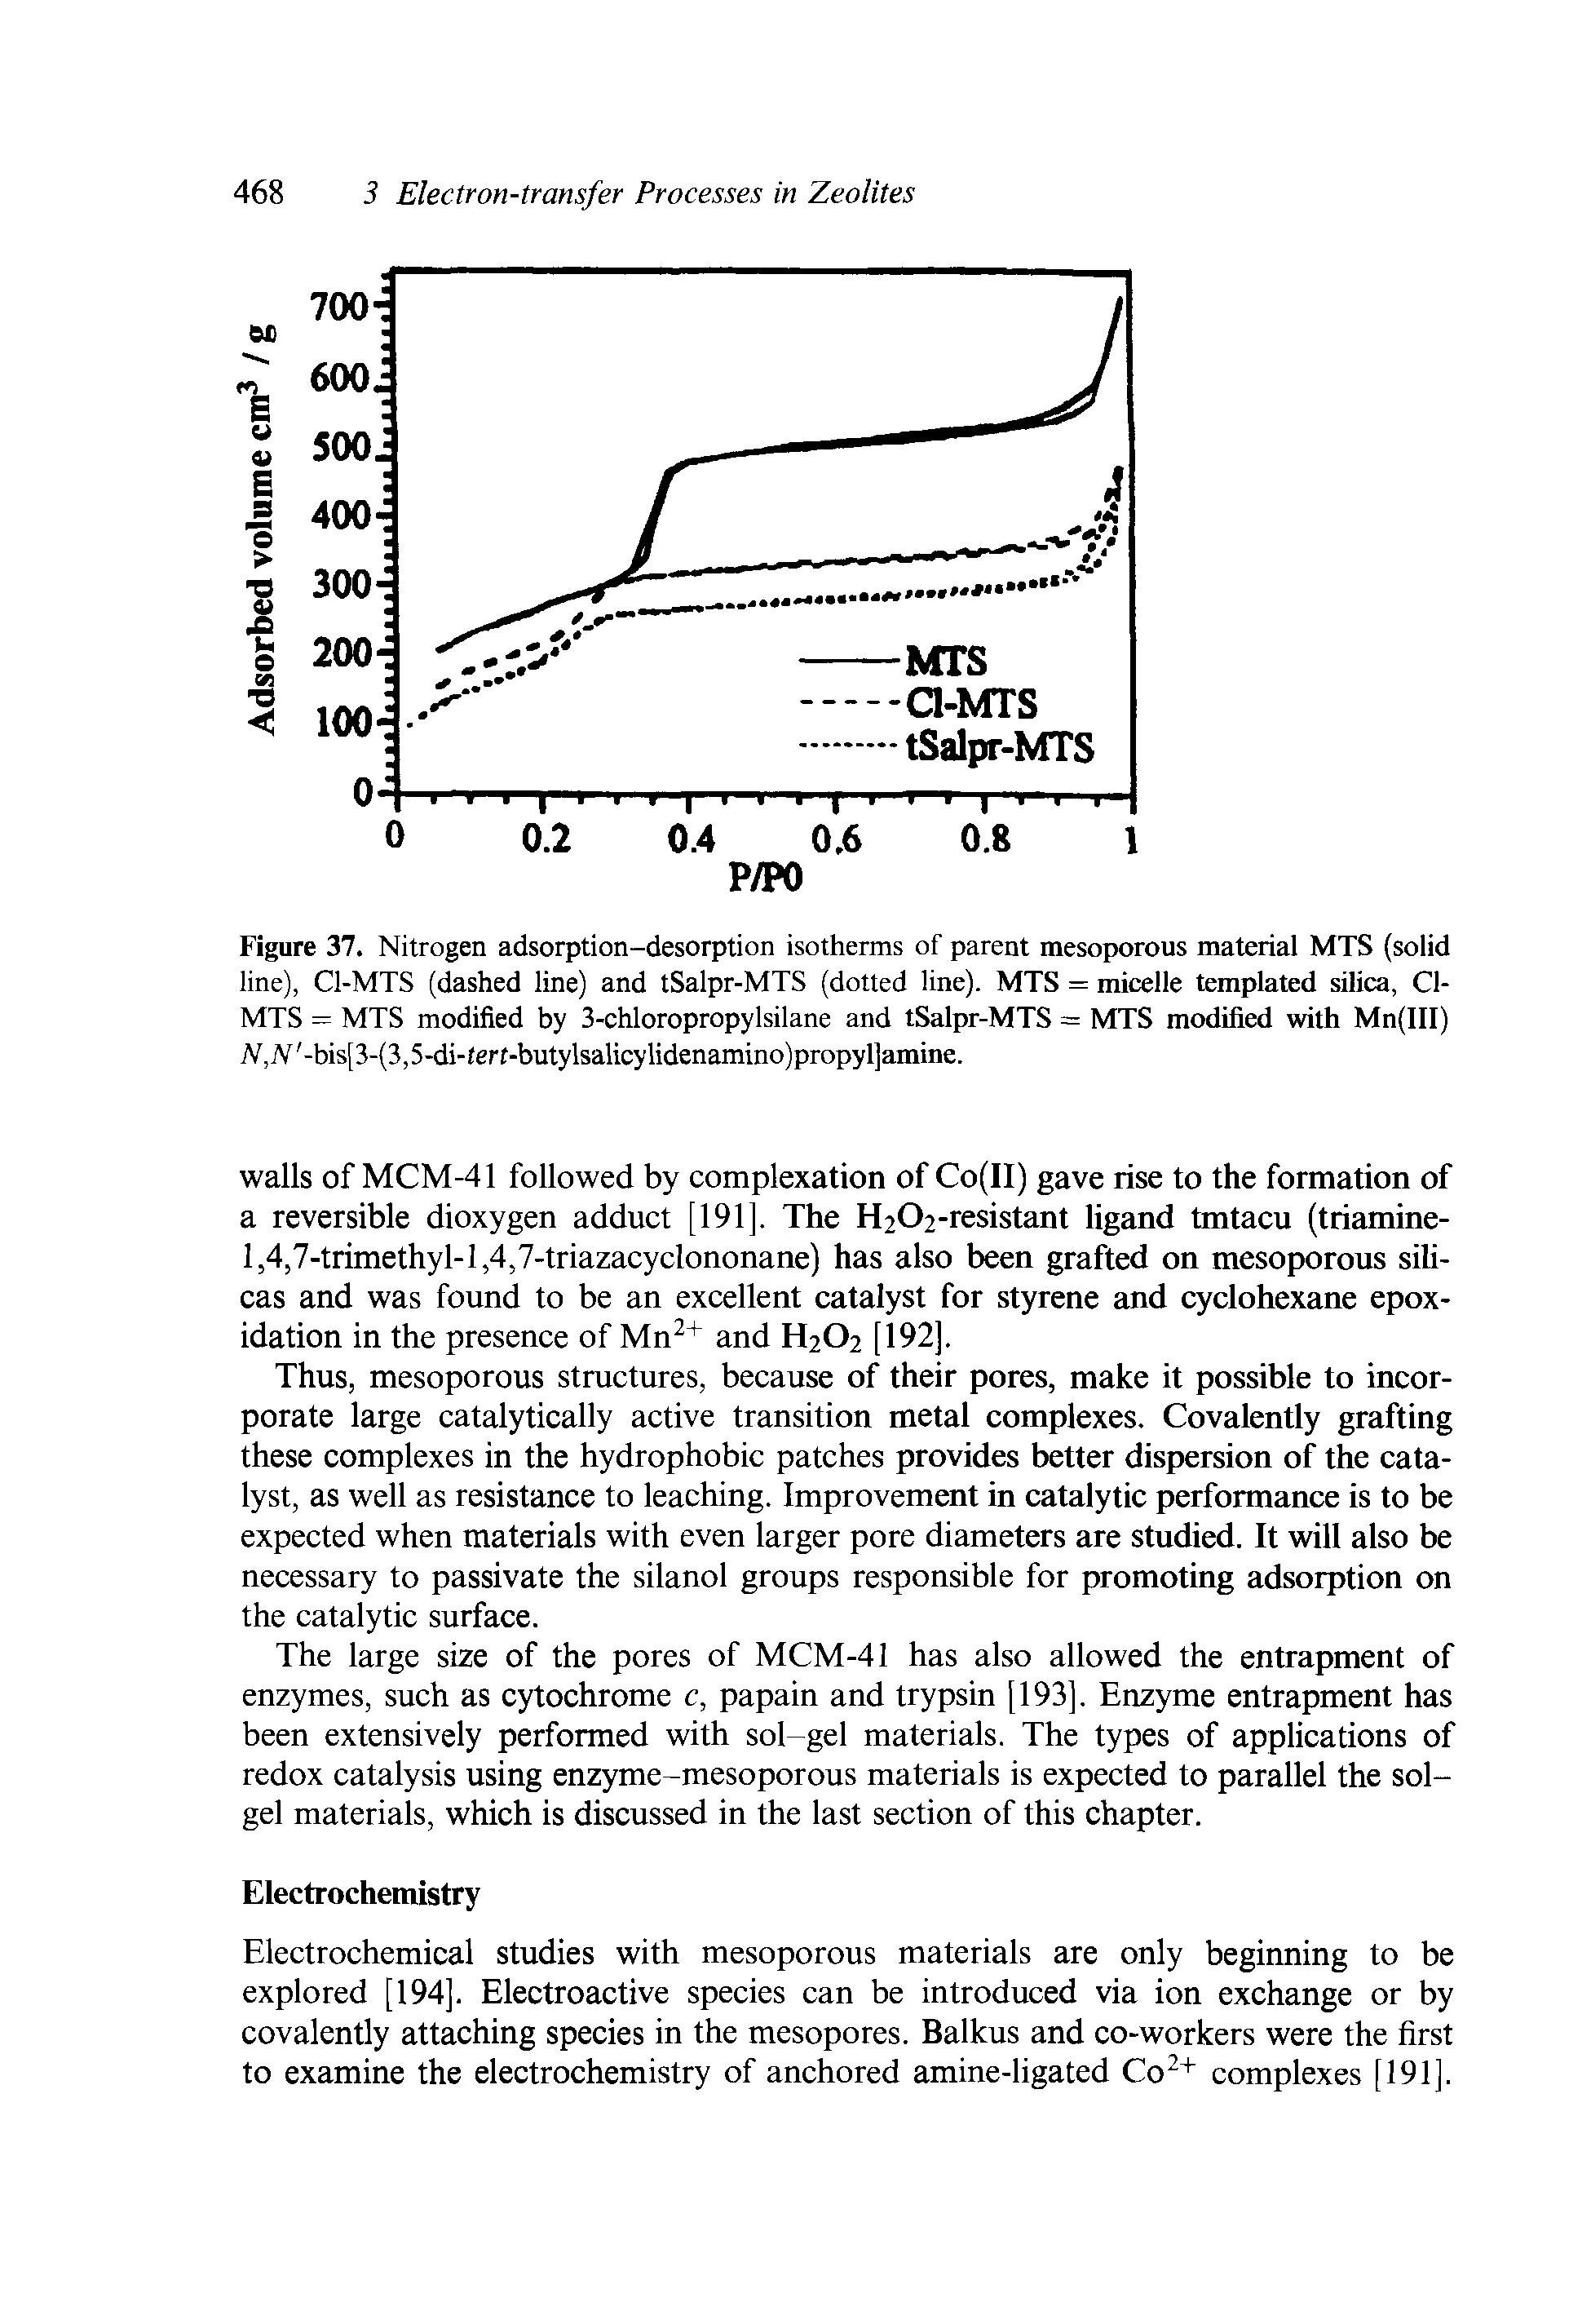 Figure 37. Nitrogen adsorption-desorption isotherms of parent mesoporous material MTS (solid line), Cl-MTS (dashed line) and tSalpr-MTS (dotted line). MTS = micelle templated silica, Cl-MTS = MTS modified by 3-chloropropylsilane and tSalpr-MTS = MTS modified with Mn(III) iV,iV -bis[3-(3,5-di-ieri-butylsalicylidenamino)propyl]amine.